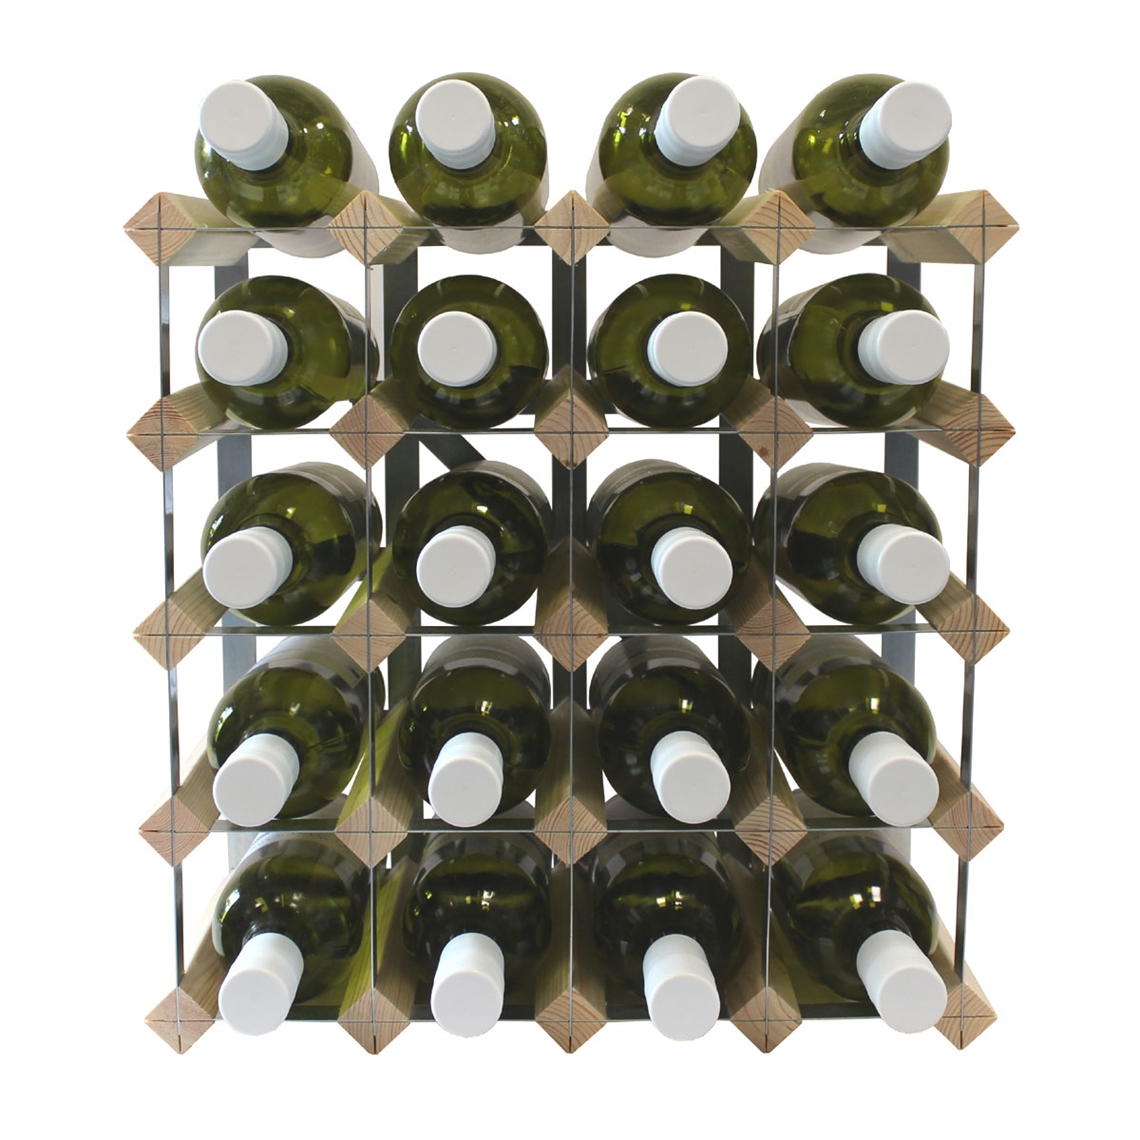 View more wine cellars and wine rooms from our Assembled Wine Racks range